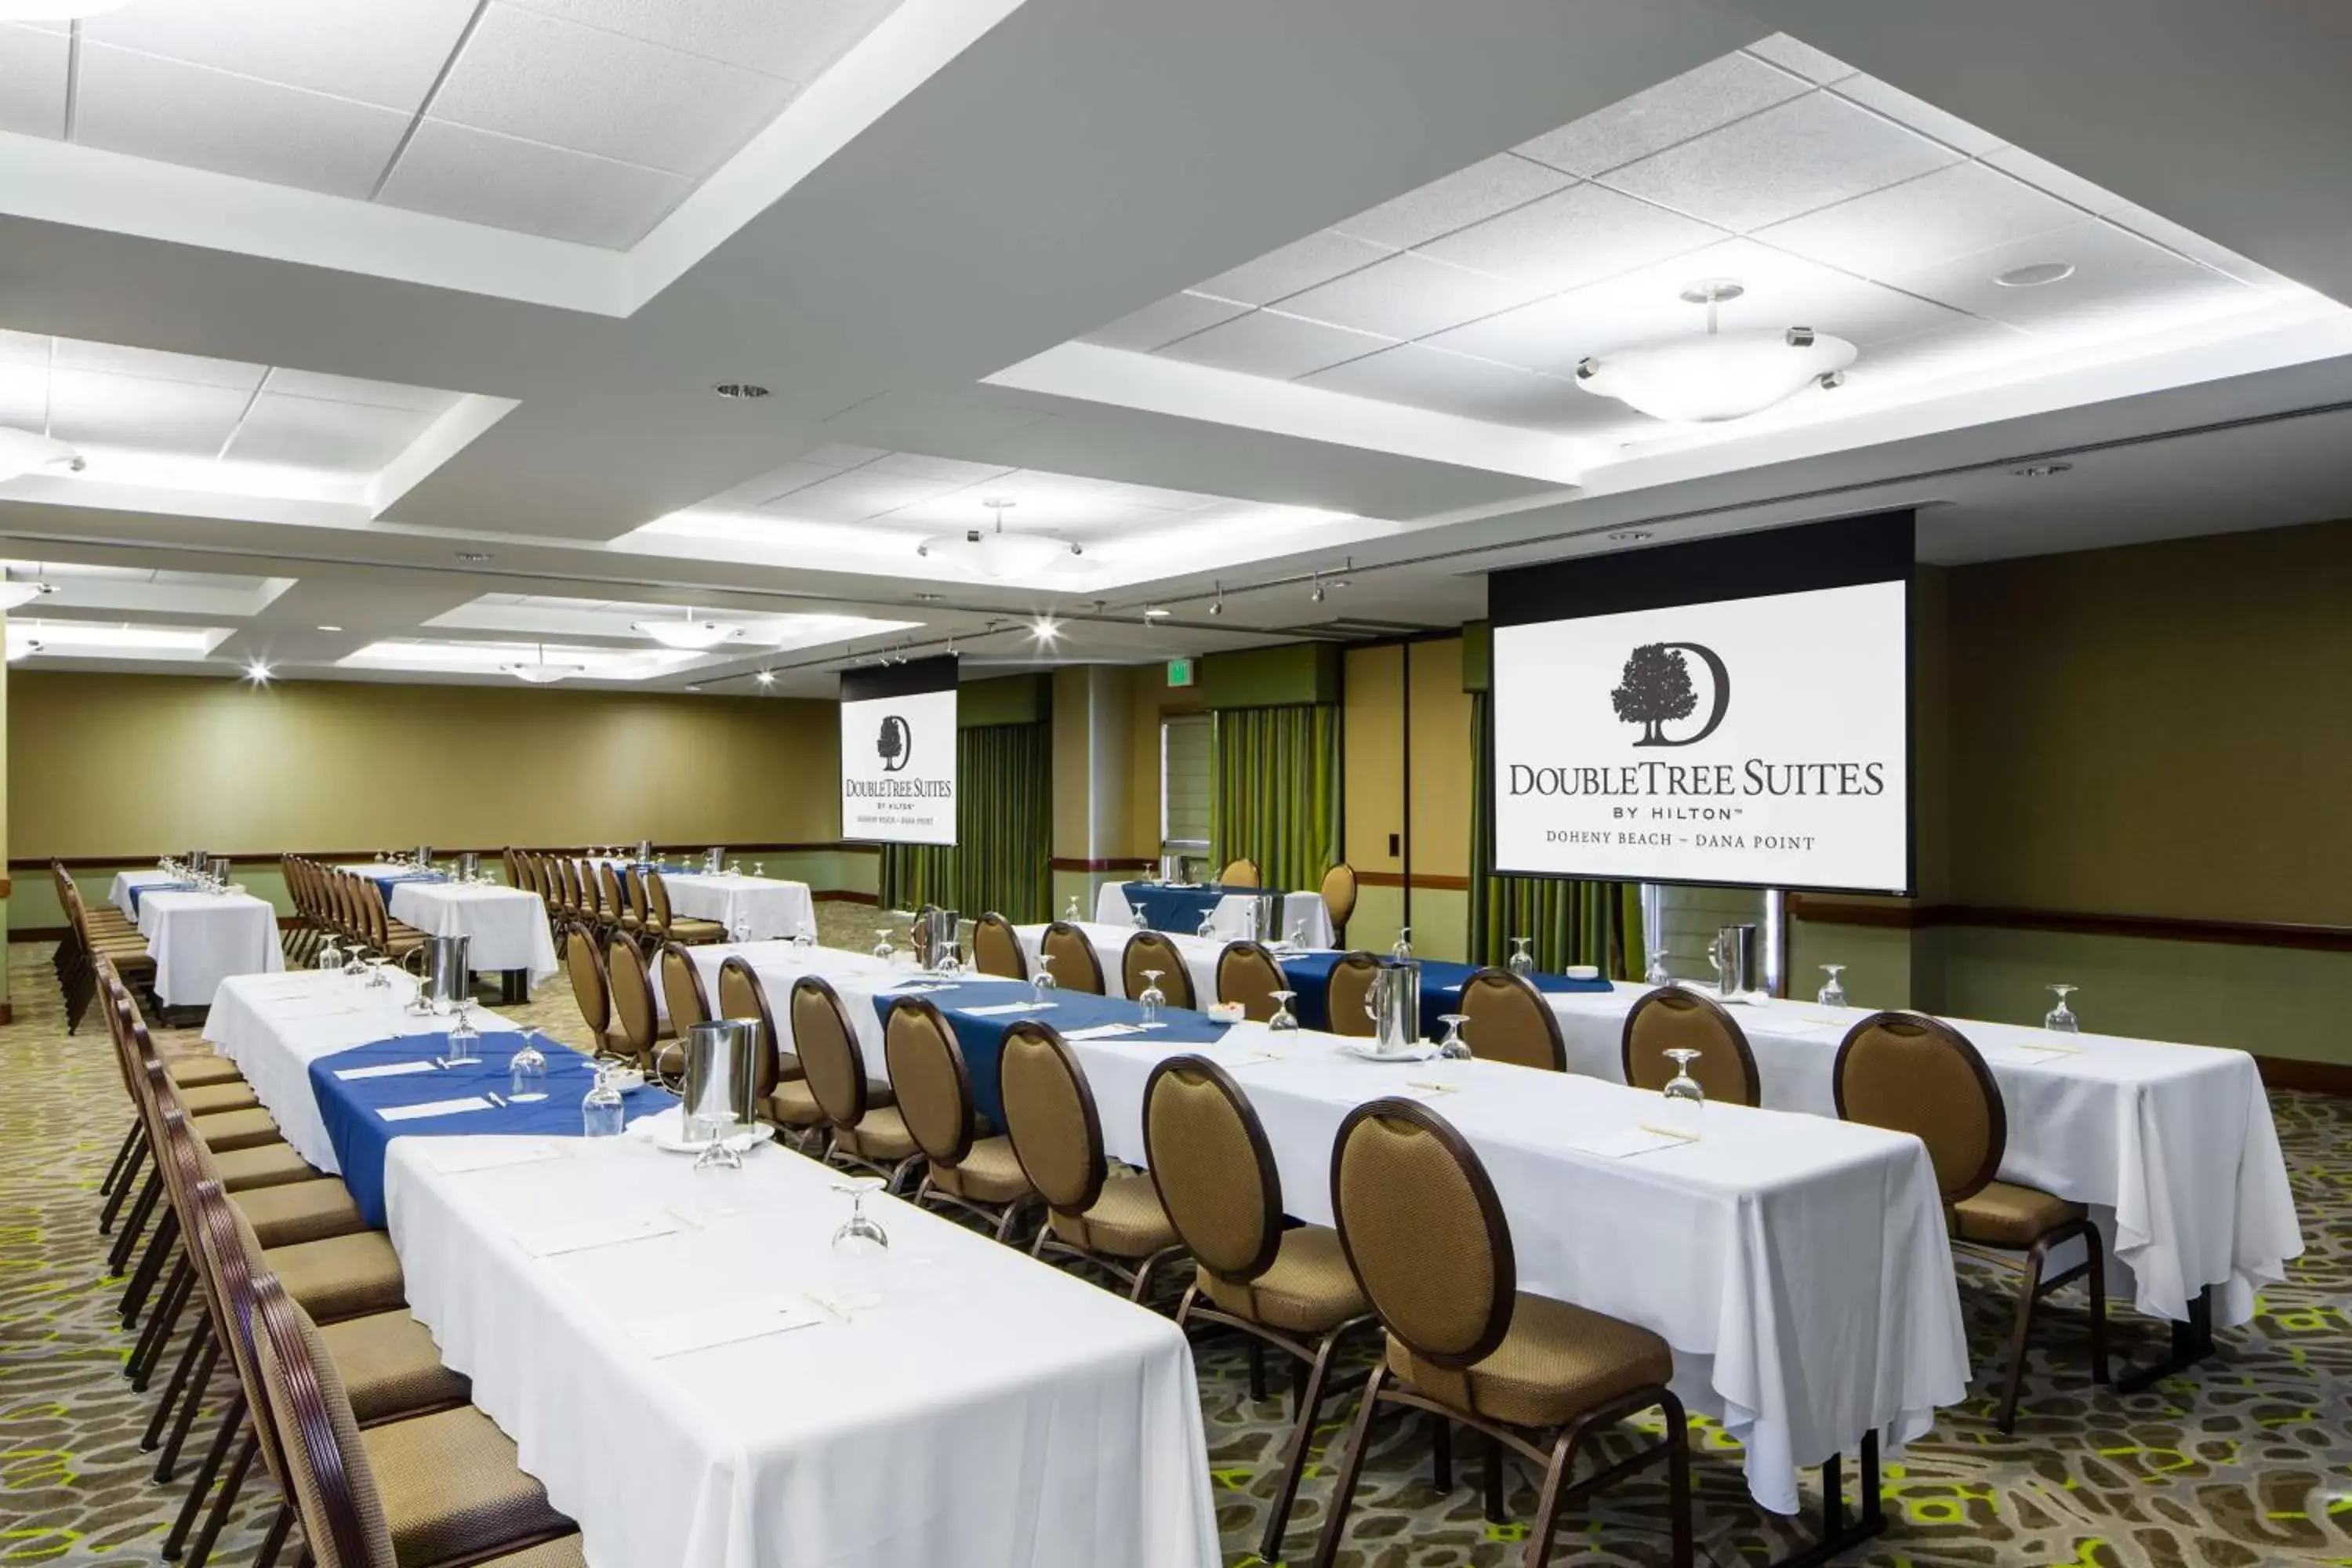 Meeting/conference room in DoubleTree Suites by Hilton Doheny Beach